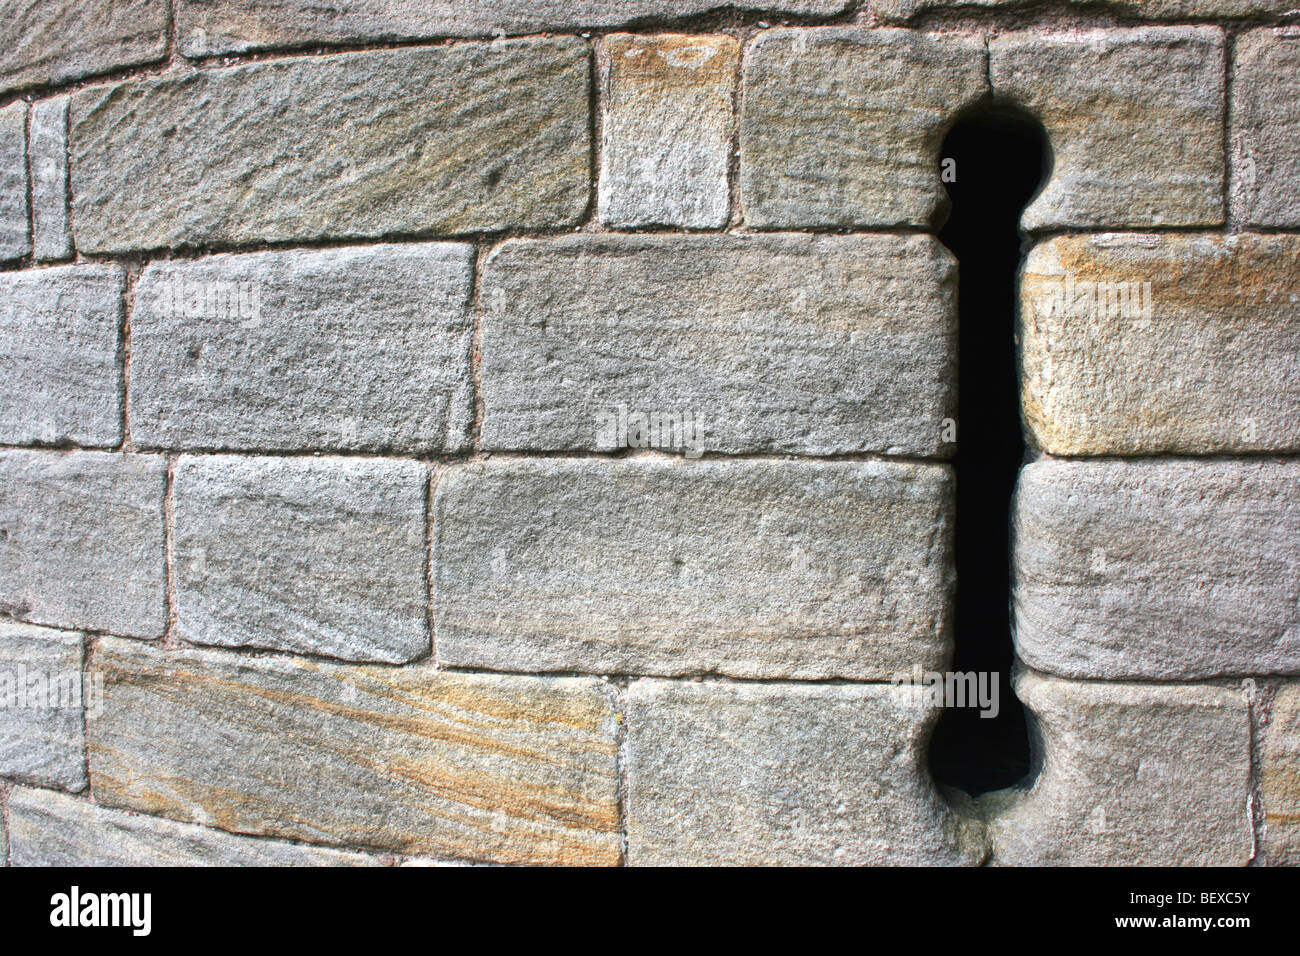 balistraria / arrow-slit in walls of Stirling Castle, Scotland Stock Photo